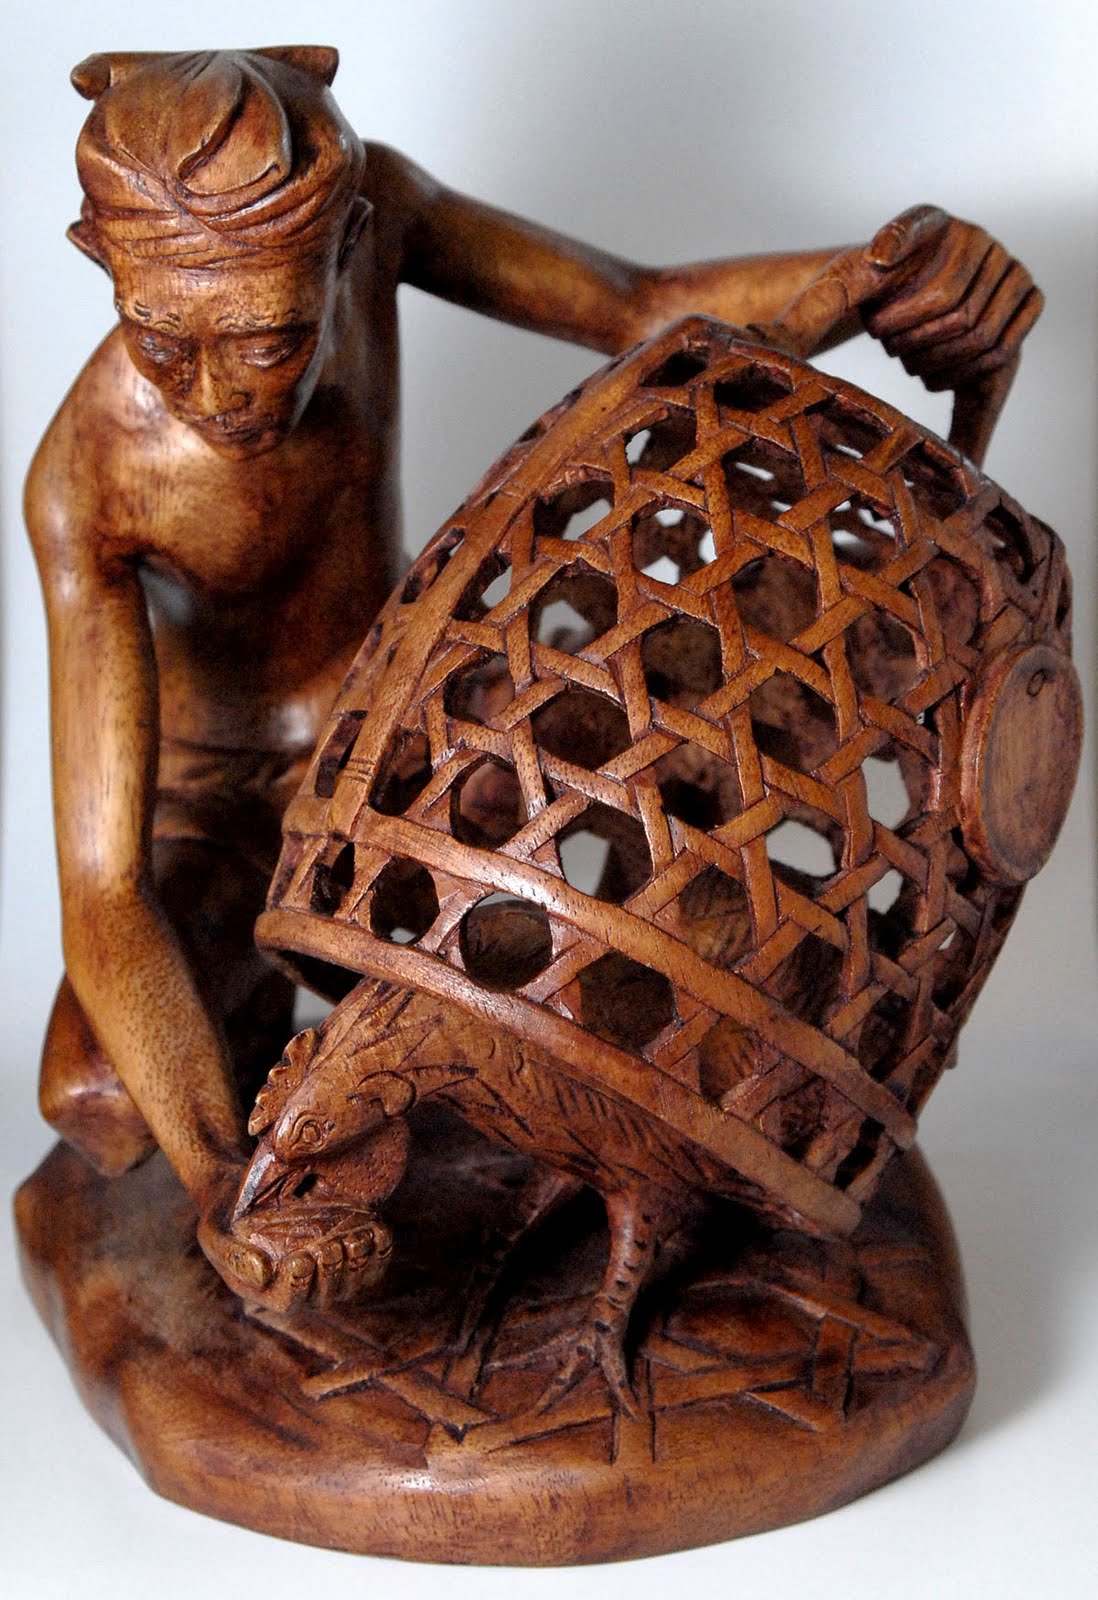 Craft Central: Bali Wood Carving – Great Form of Art